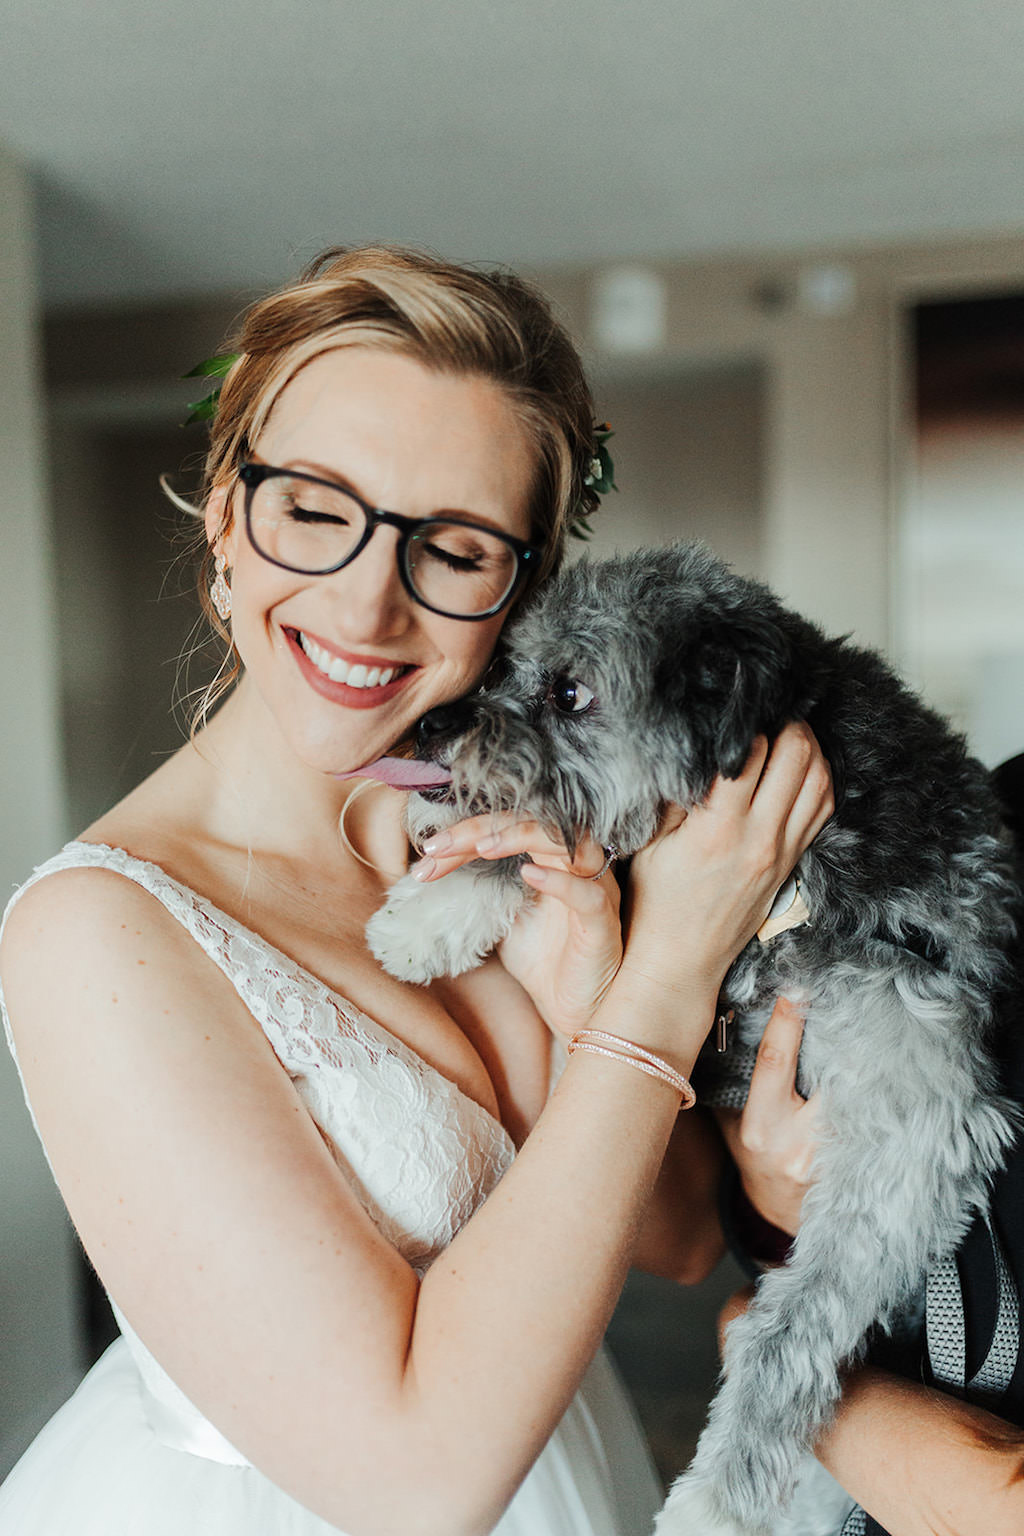 Tampa Bay Bride with Dog Wedding Portrait | Tampa Bay Wedding Pet Sitting Services by FairyTail Pet Care | Tampa Bay Wedding Hair and Makeup Artist Femme Akoi